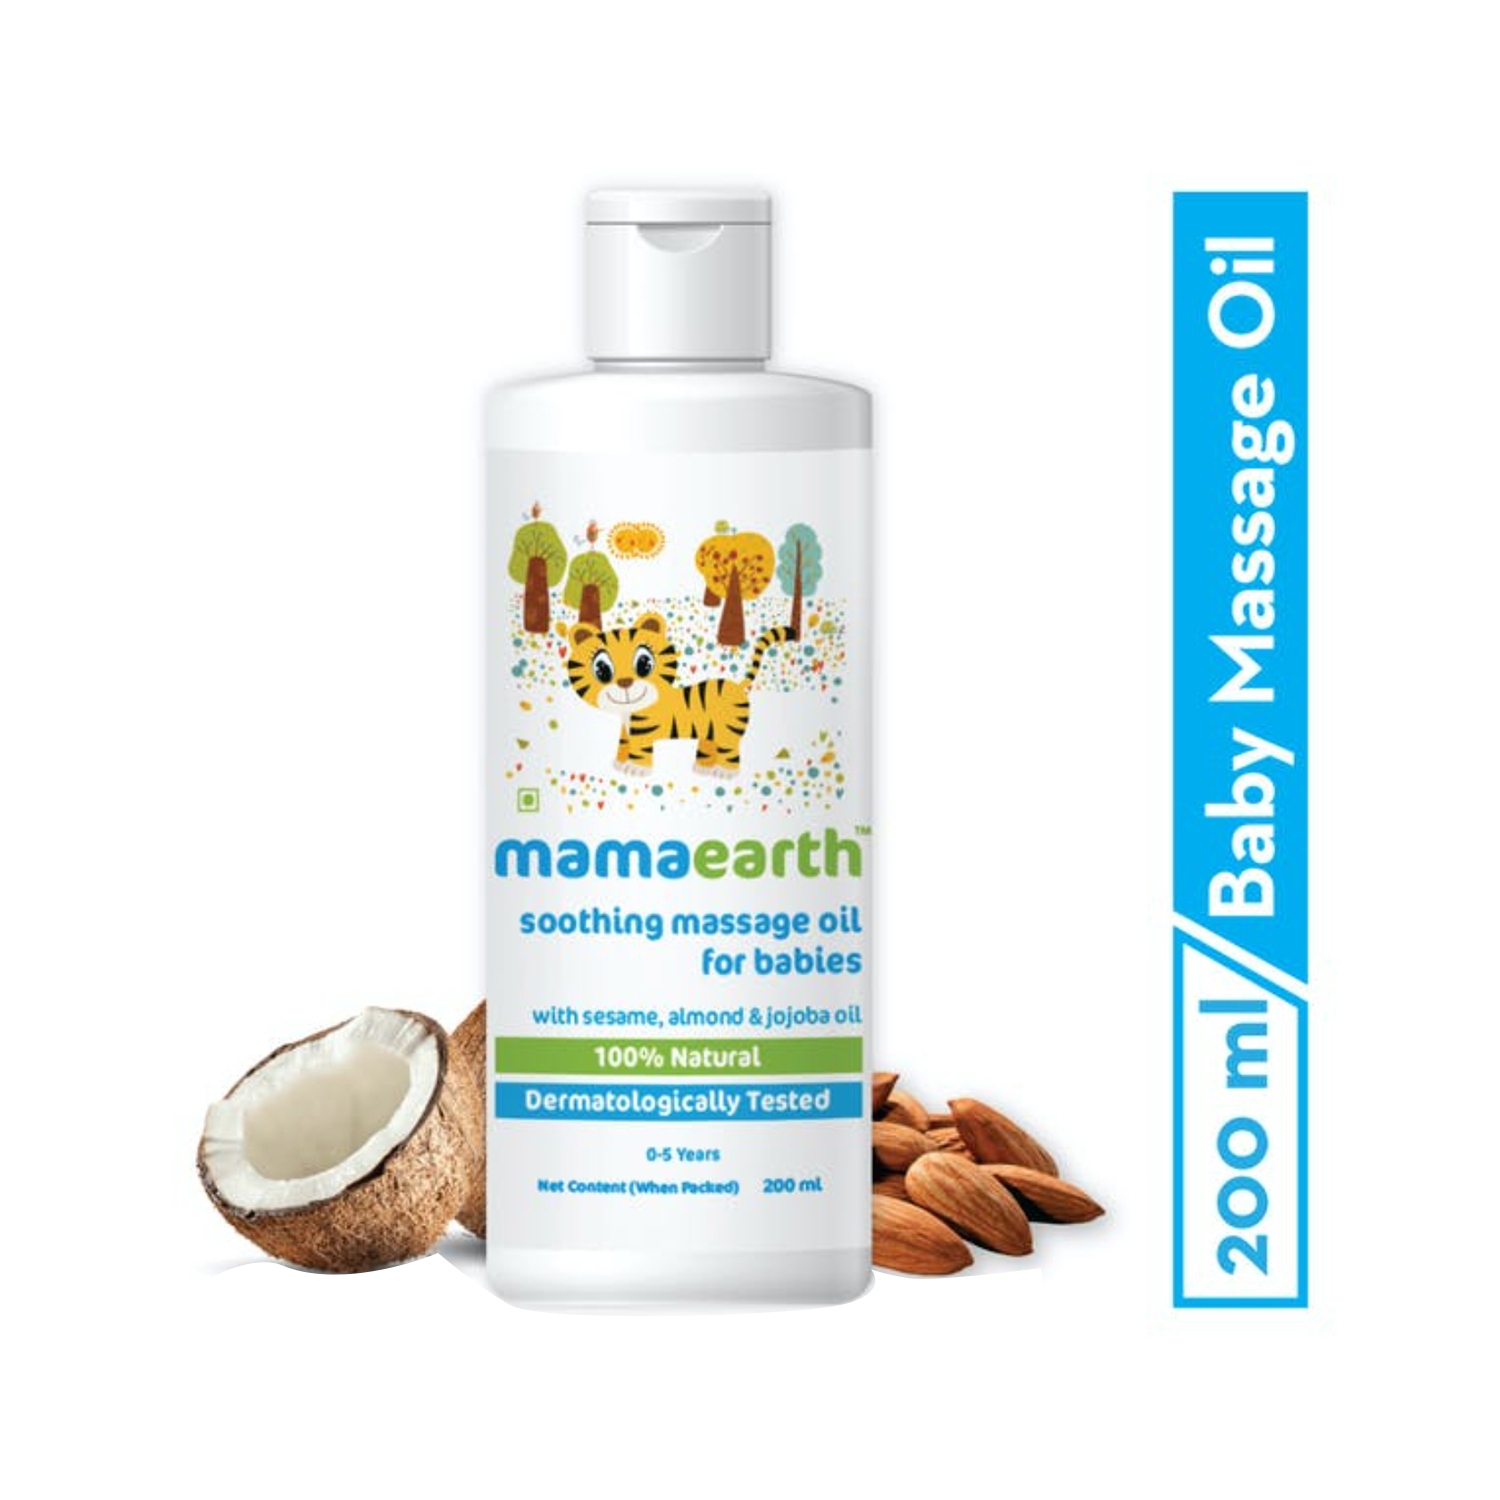 Mamaearth | Mamaearth Soothing Baby Massage Oil With Sesame Almond & Jojoba Oil (200ml)